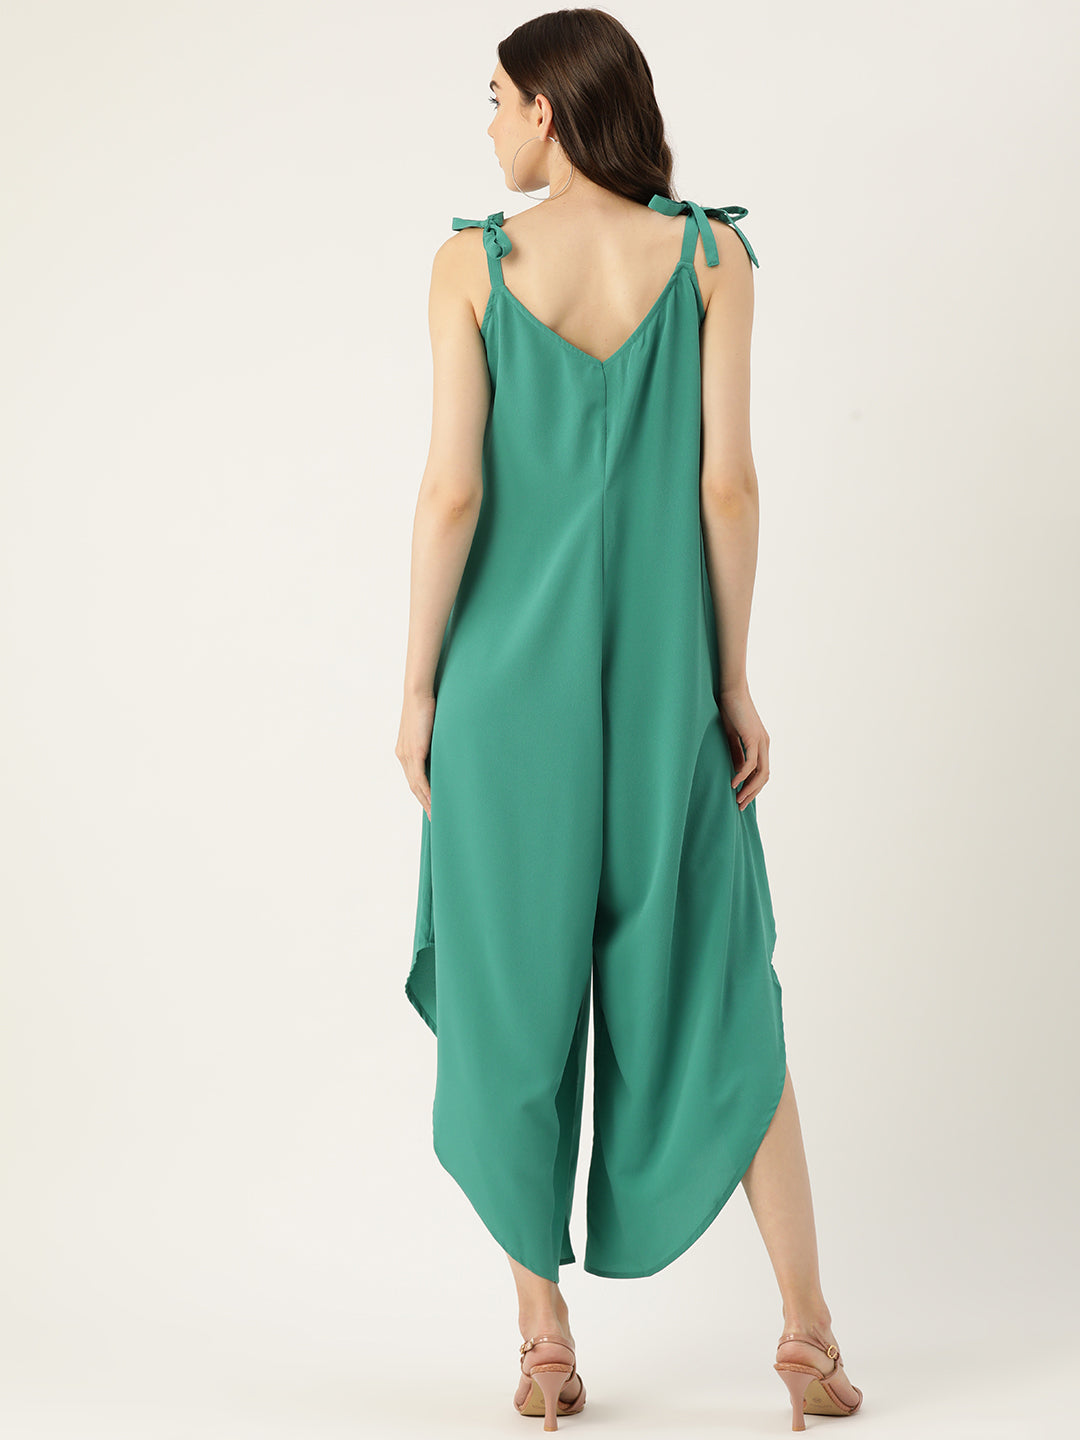 Green Solid Basic Jumpsuit